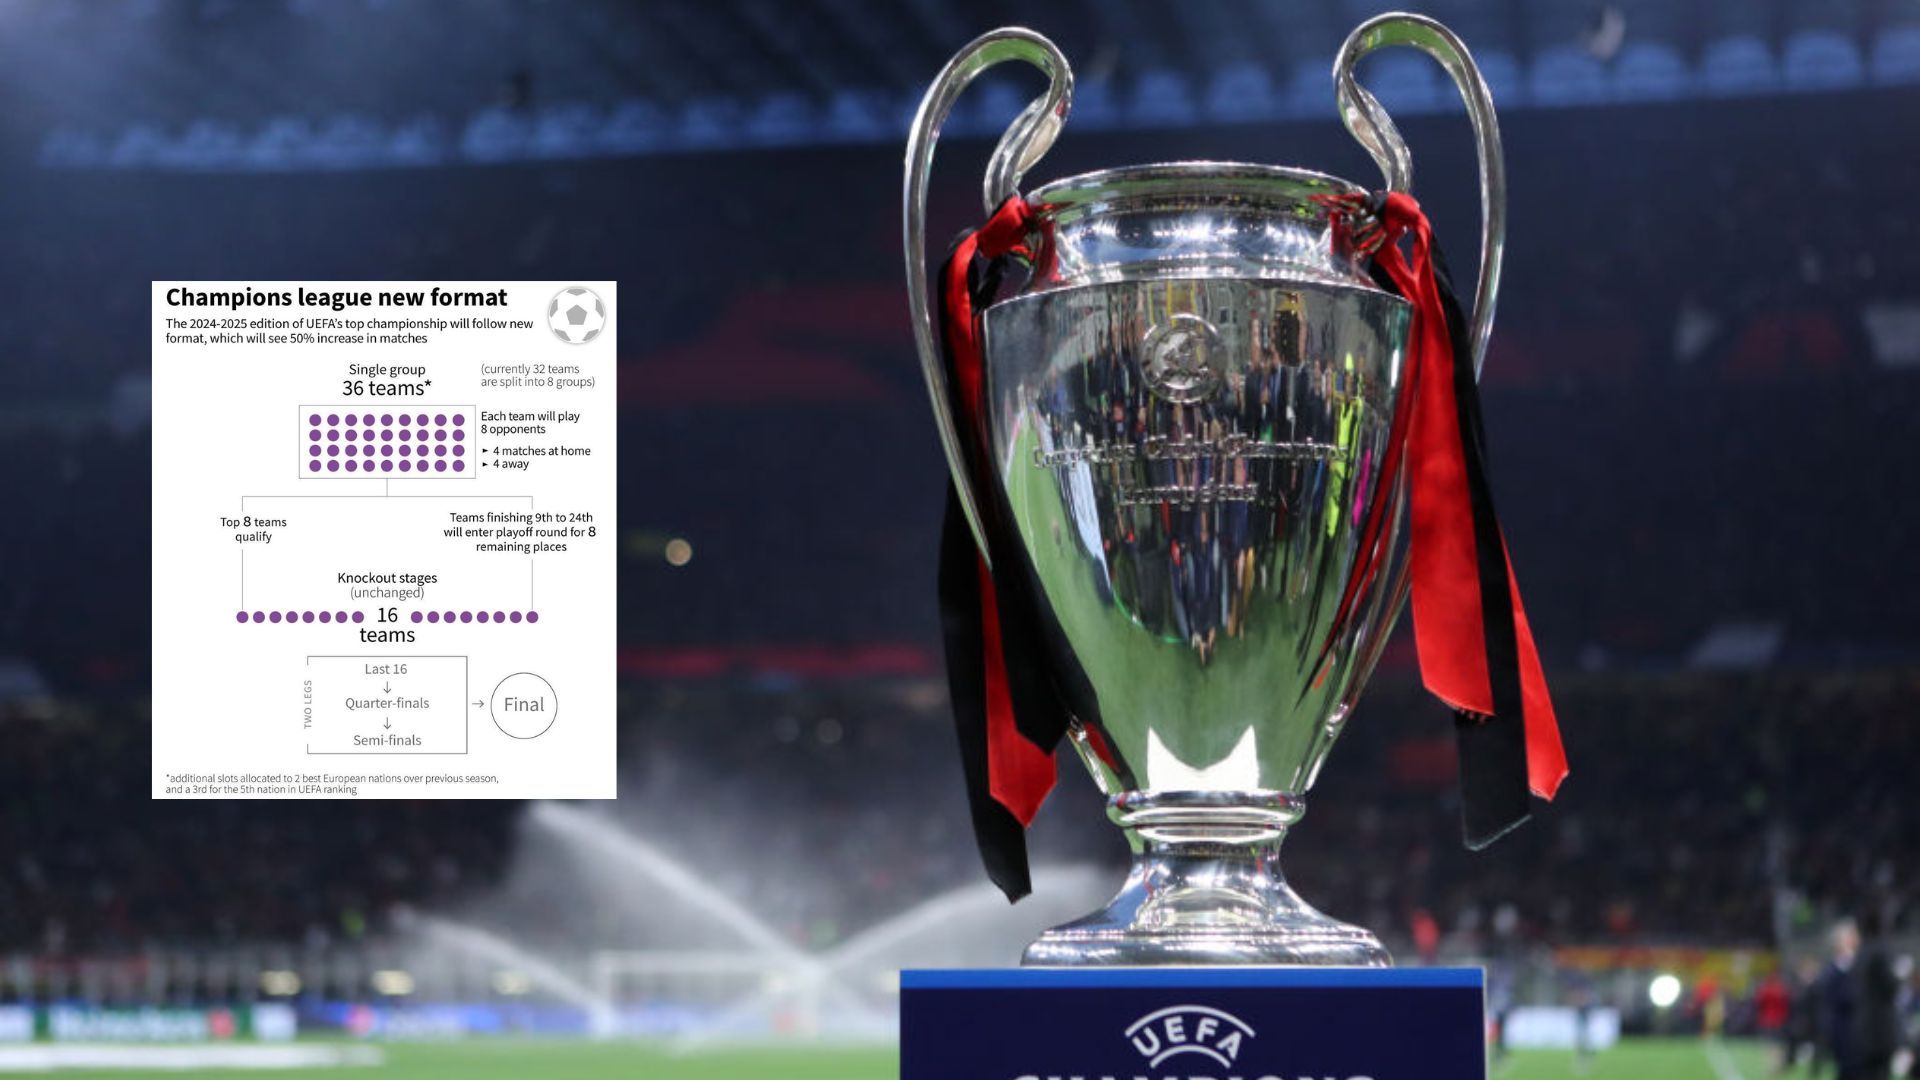 Champions League set for major changes from 2024/25…